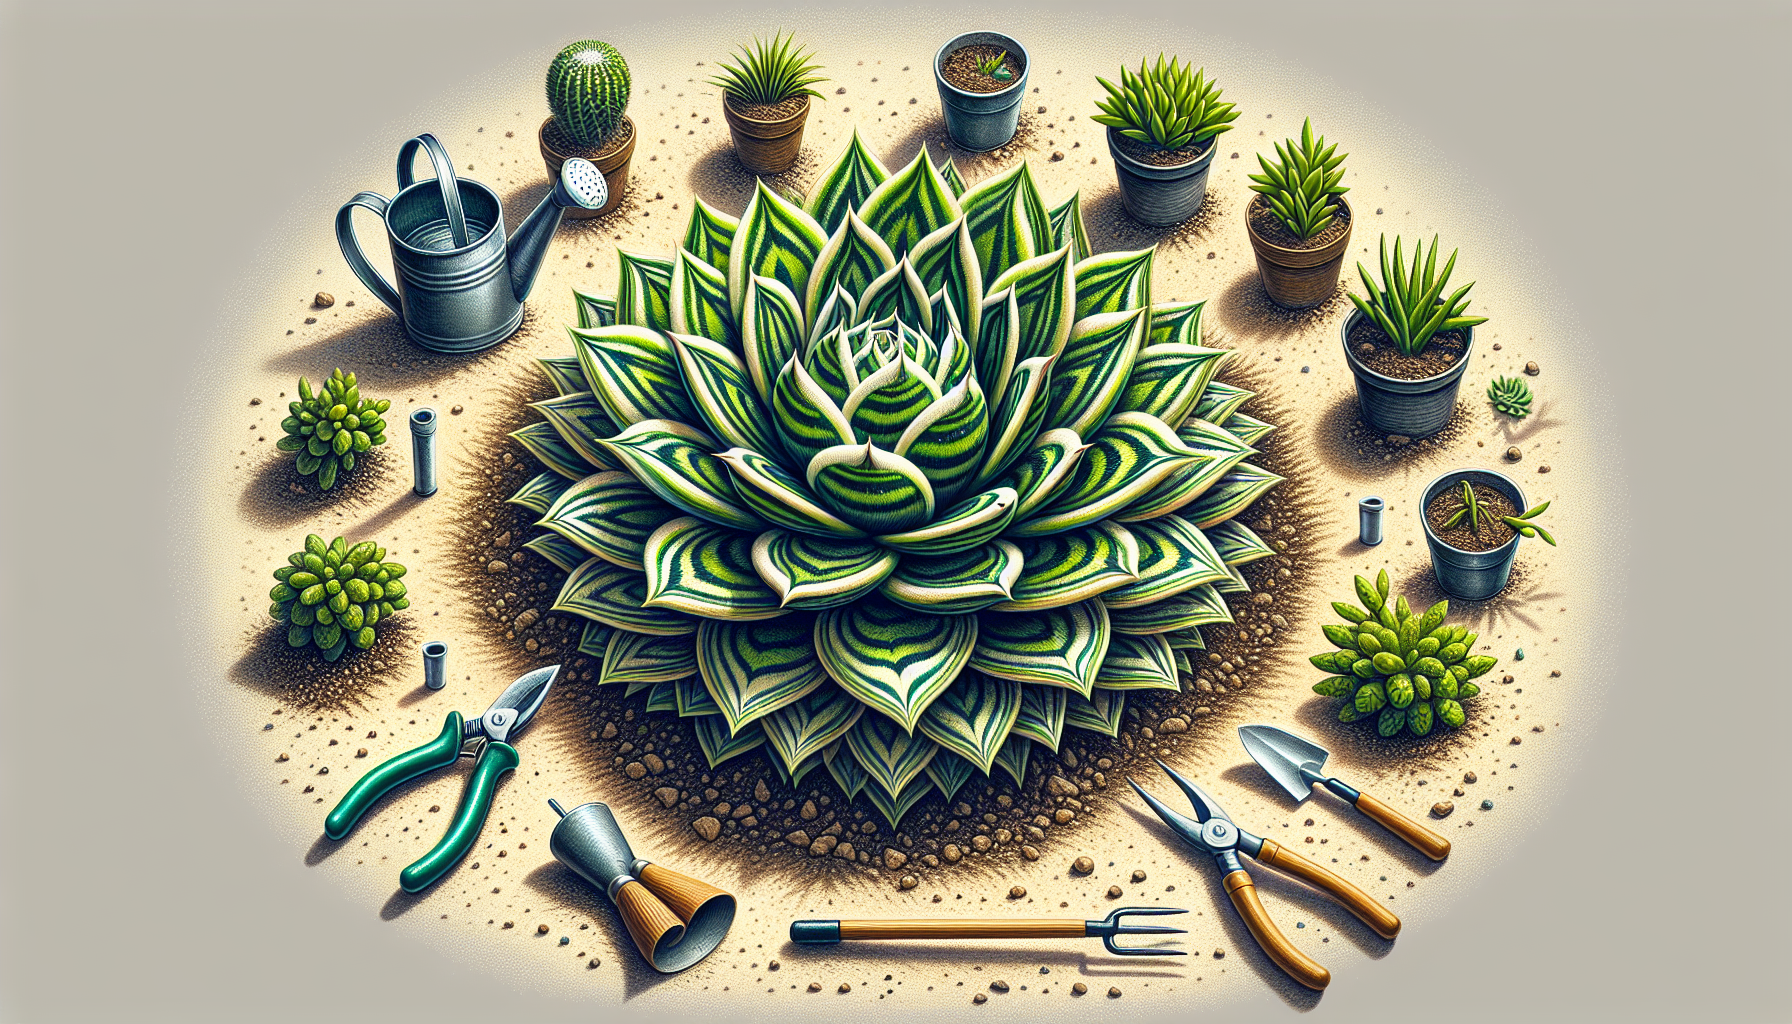 Caring for zebra succulents: avoiding common mistakes for a thriving plant